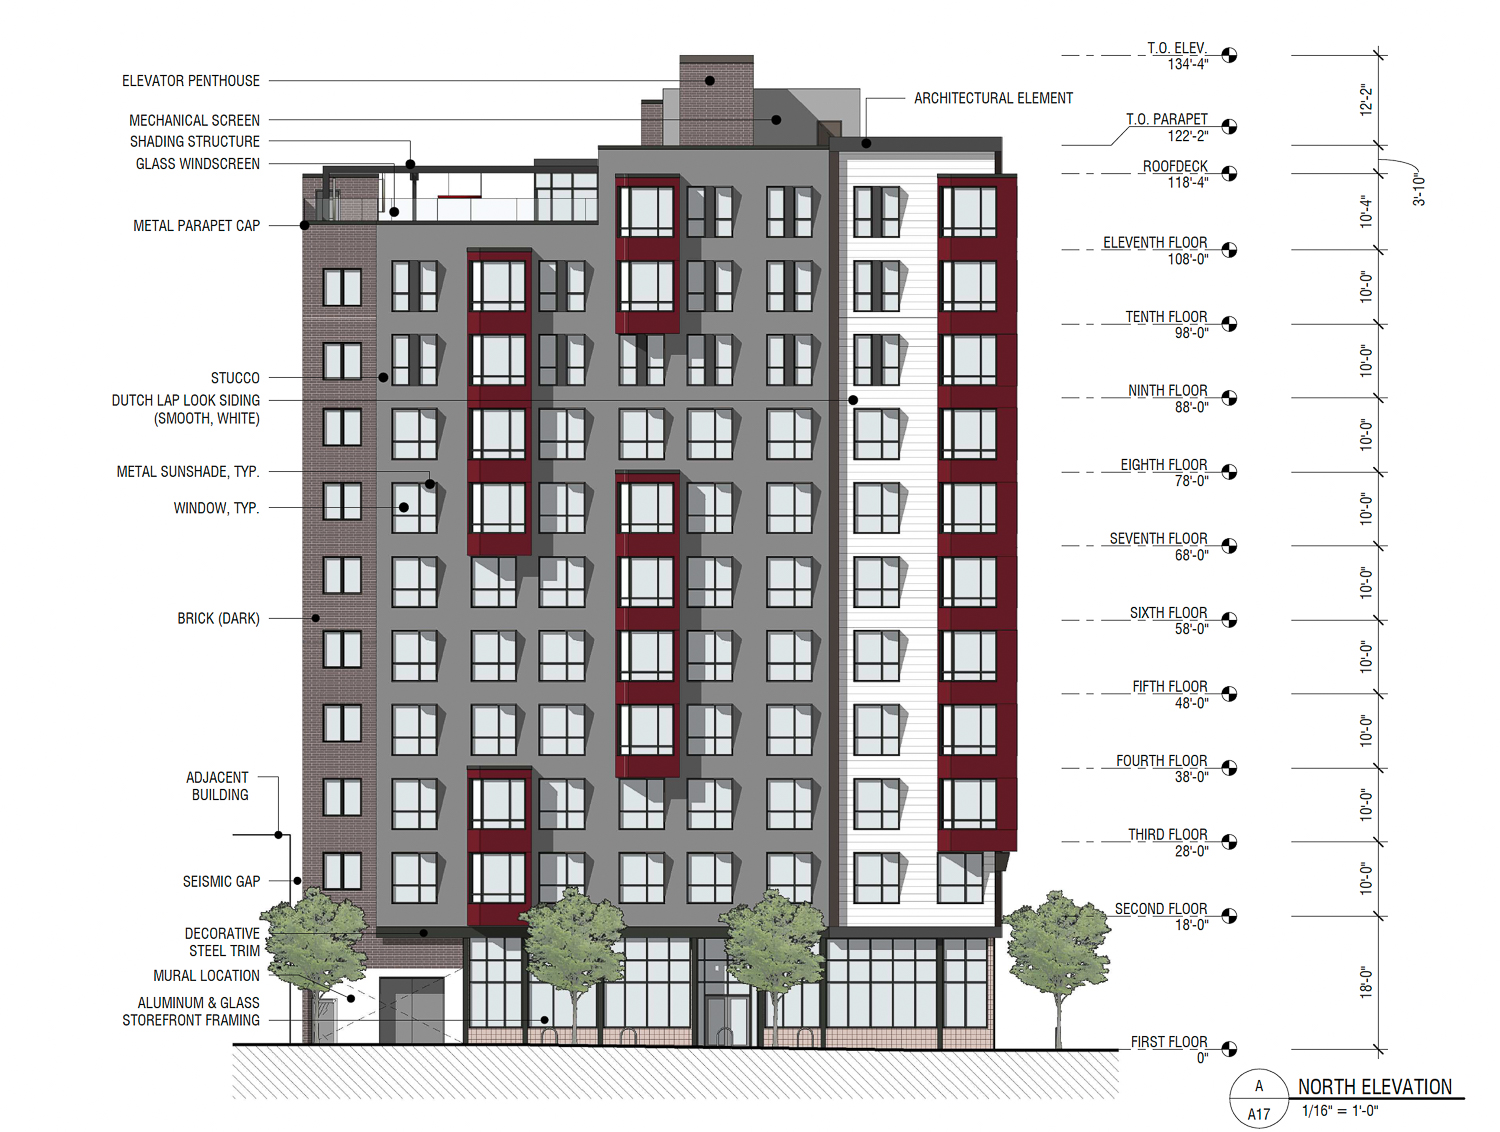 401 South Van Ness Avenue north elevation, drawing by Prime Design